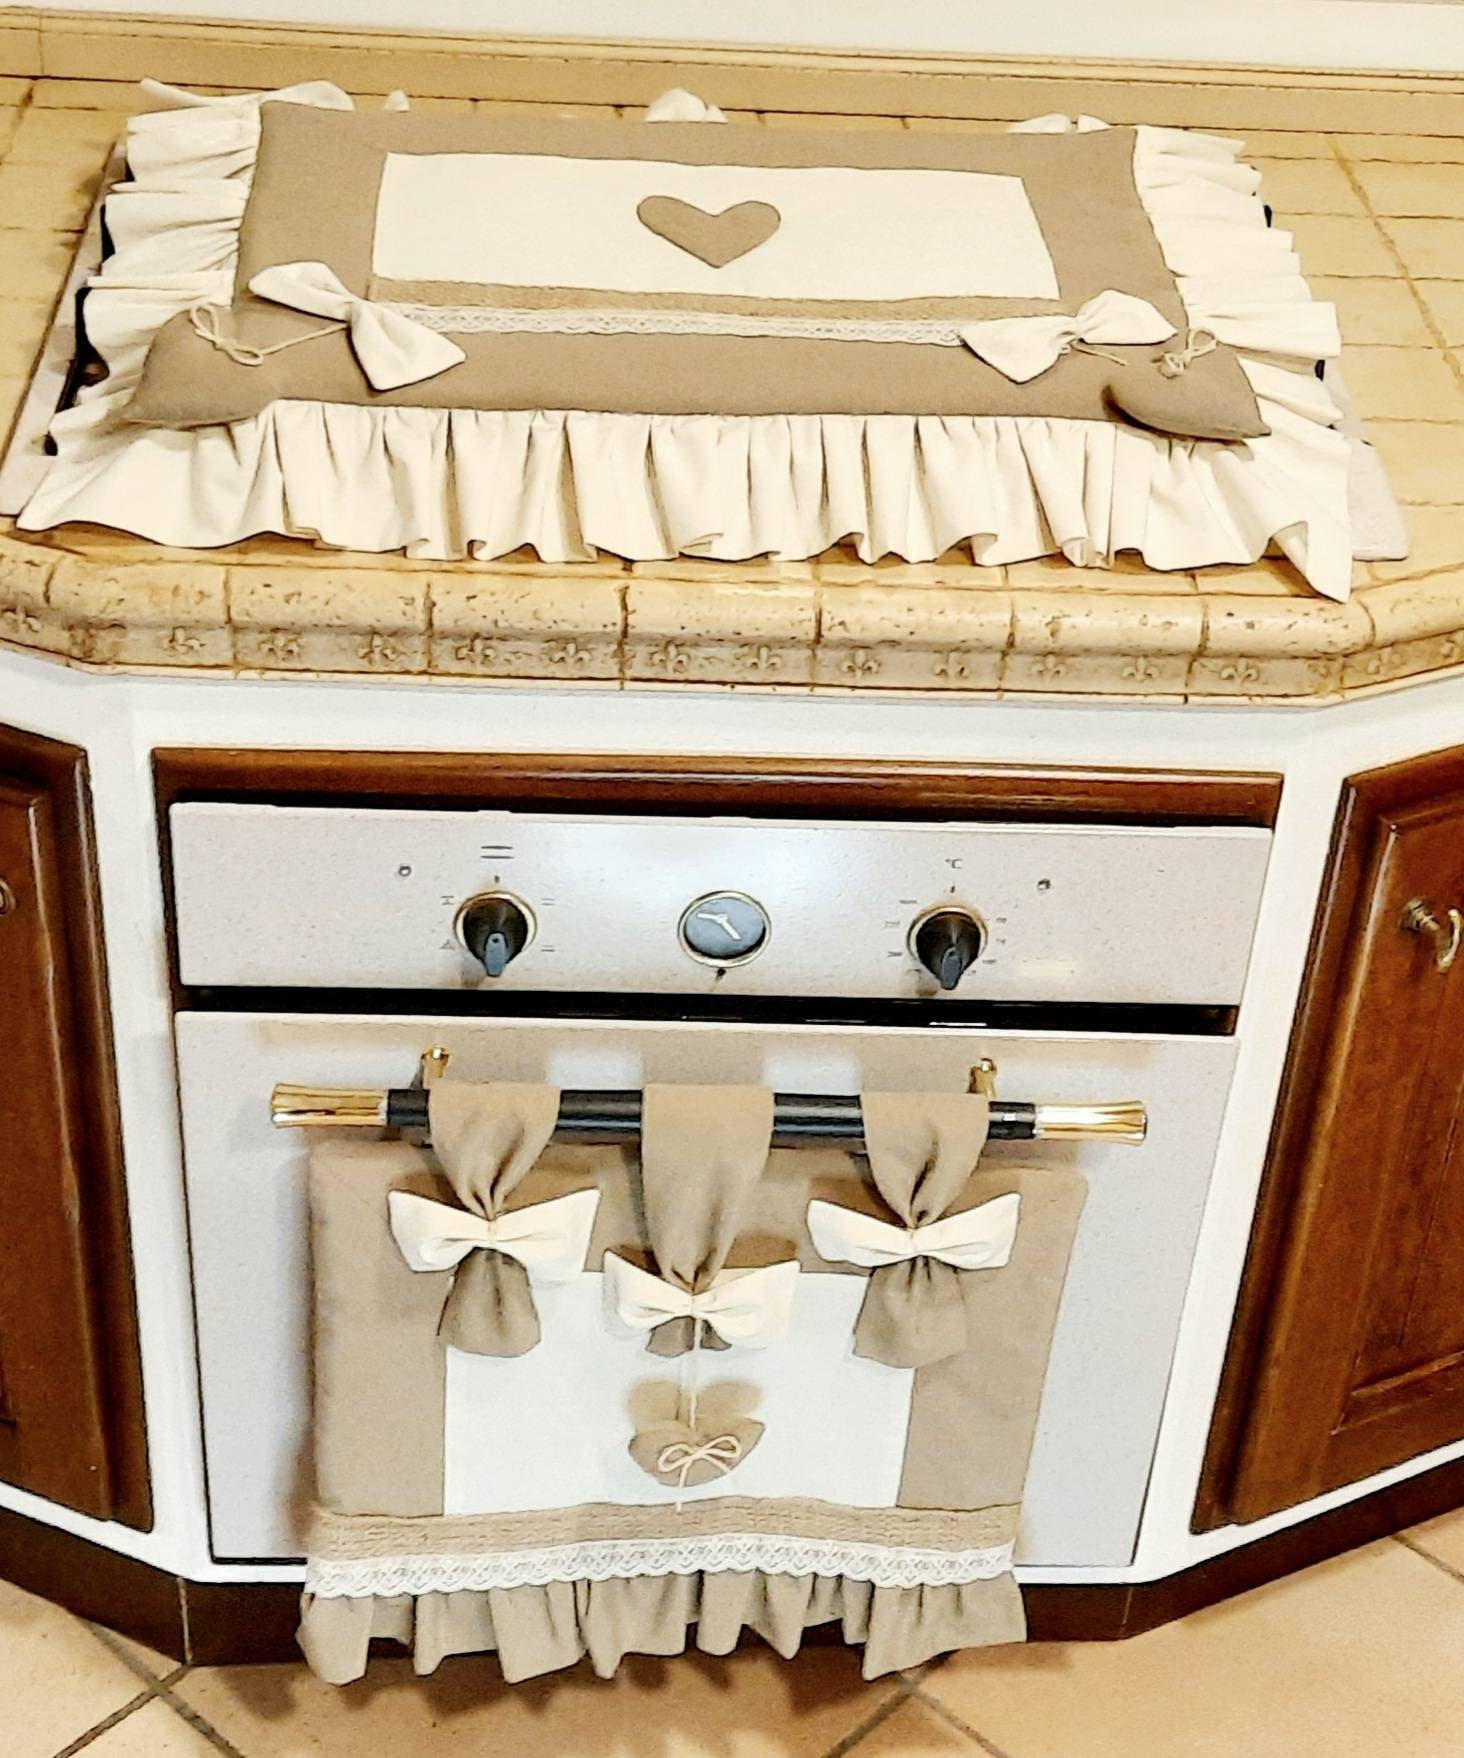 Shabby Stove Covers With Curled Ruffles and Side Bows That Hold the Wadding  Hearts. Lace Inserts and Thick Padding 